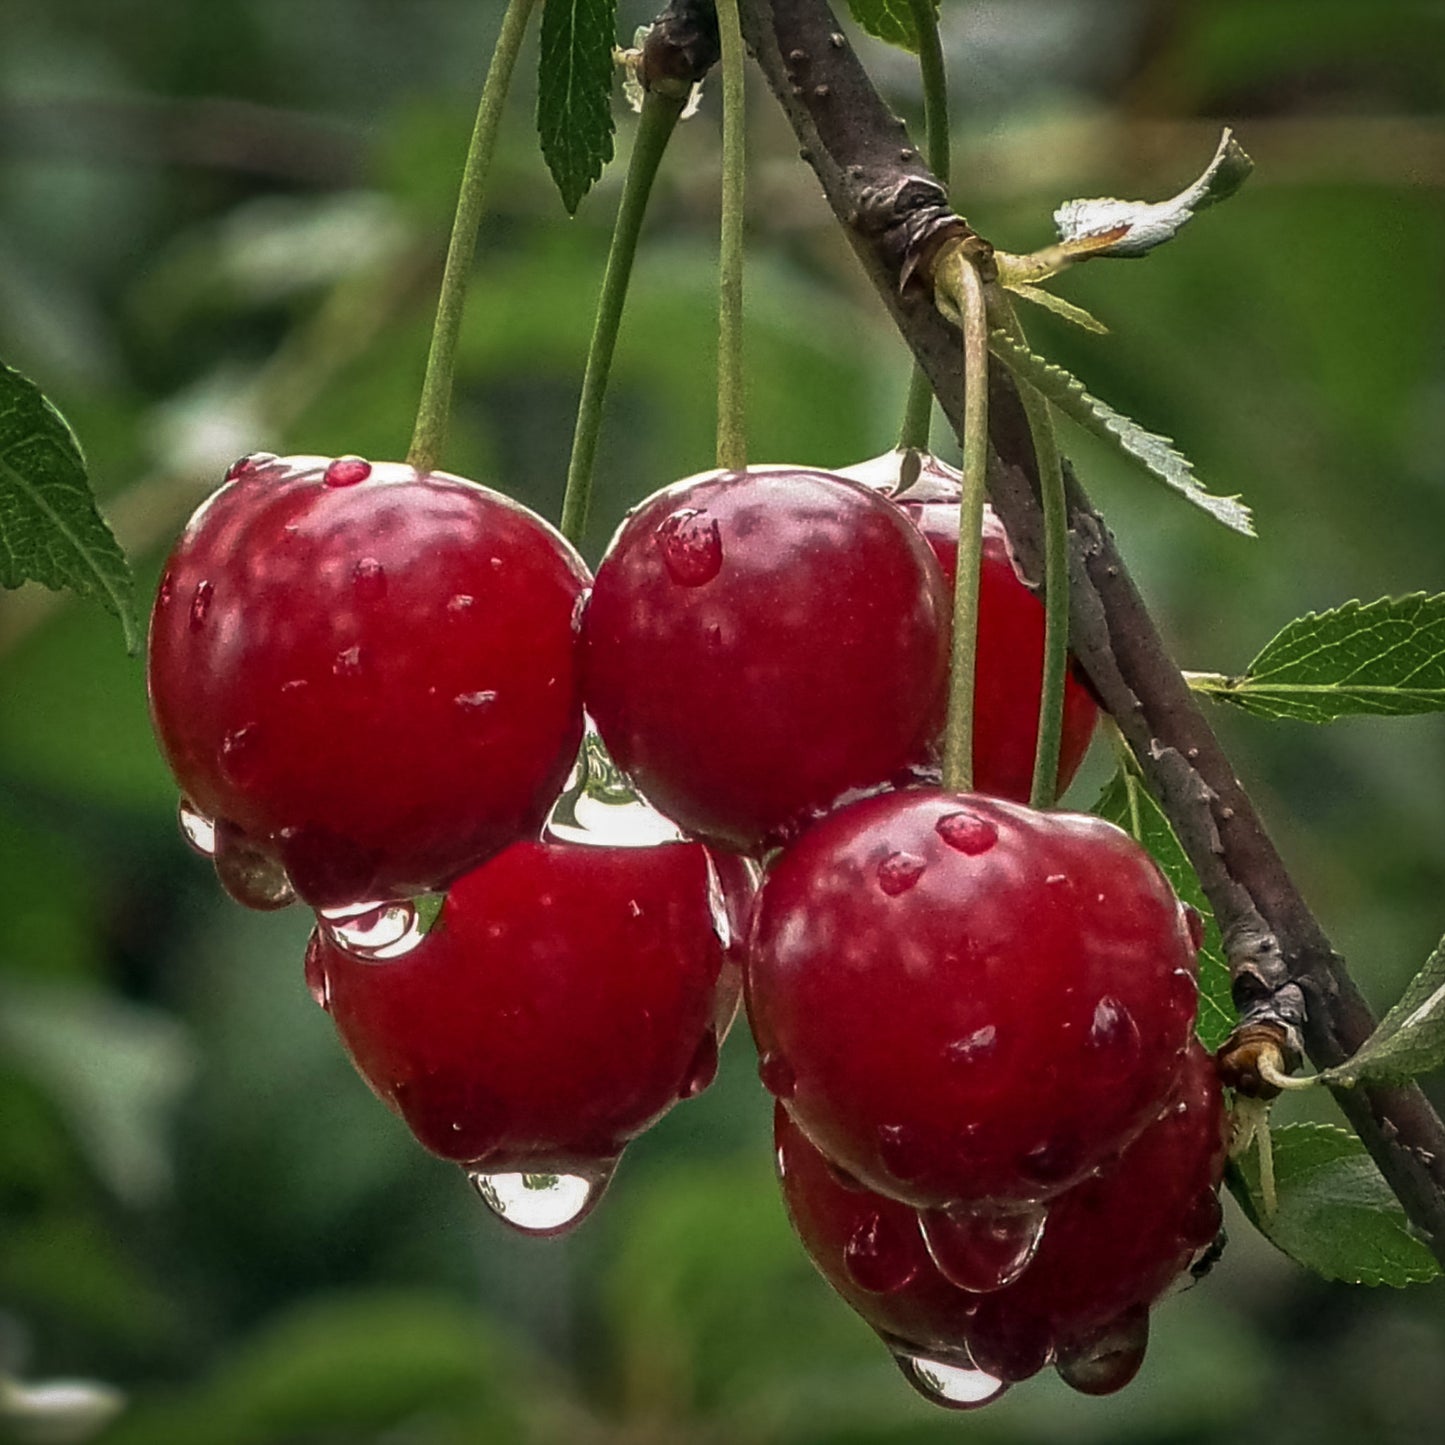 Close-up view of bright red Lapin cherries.